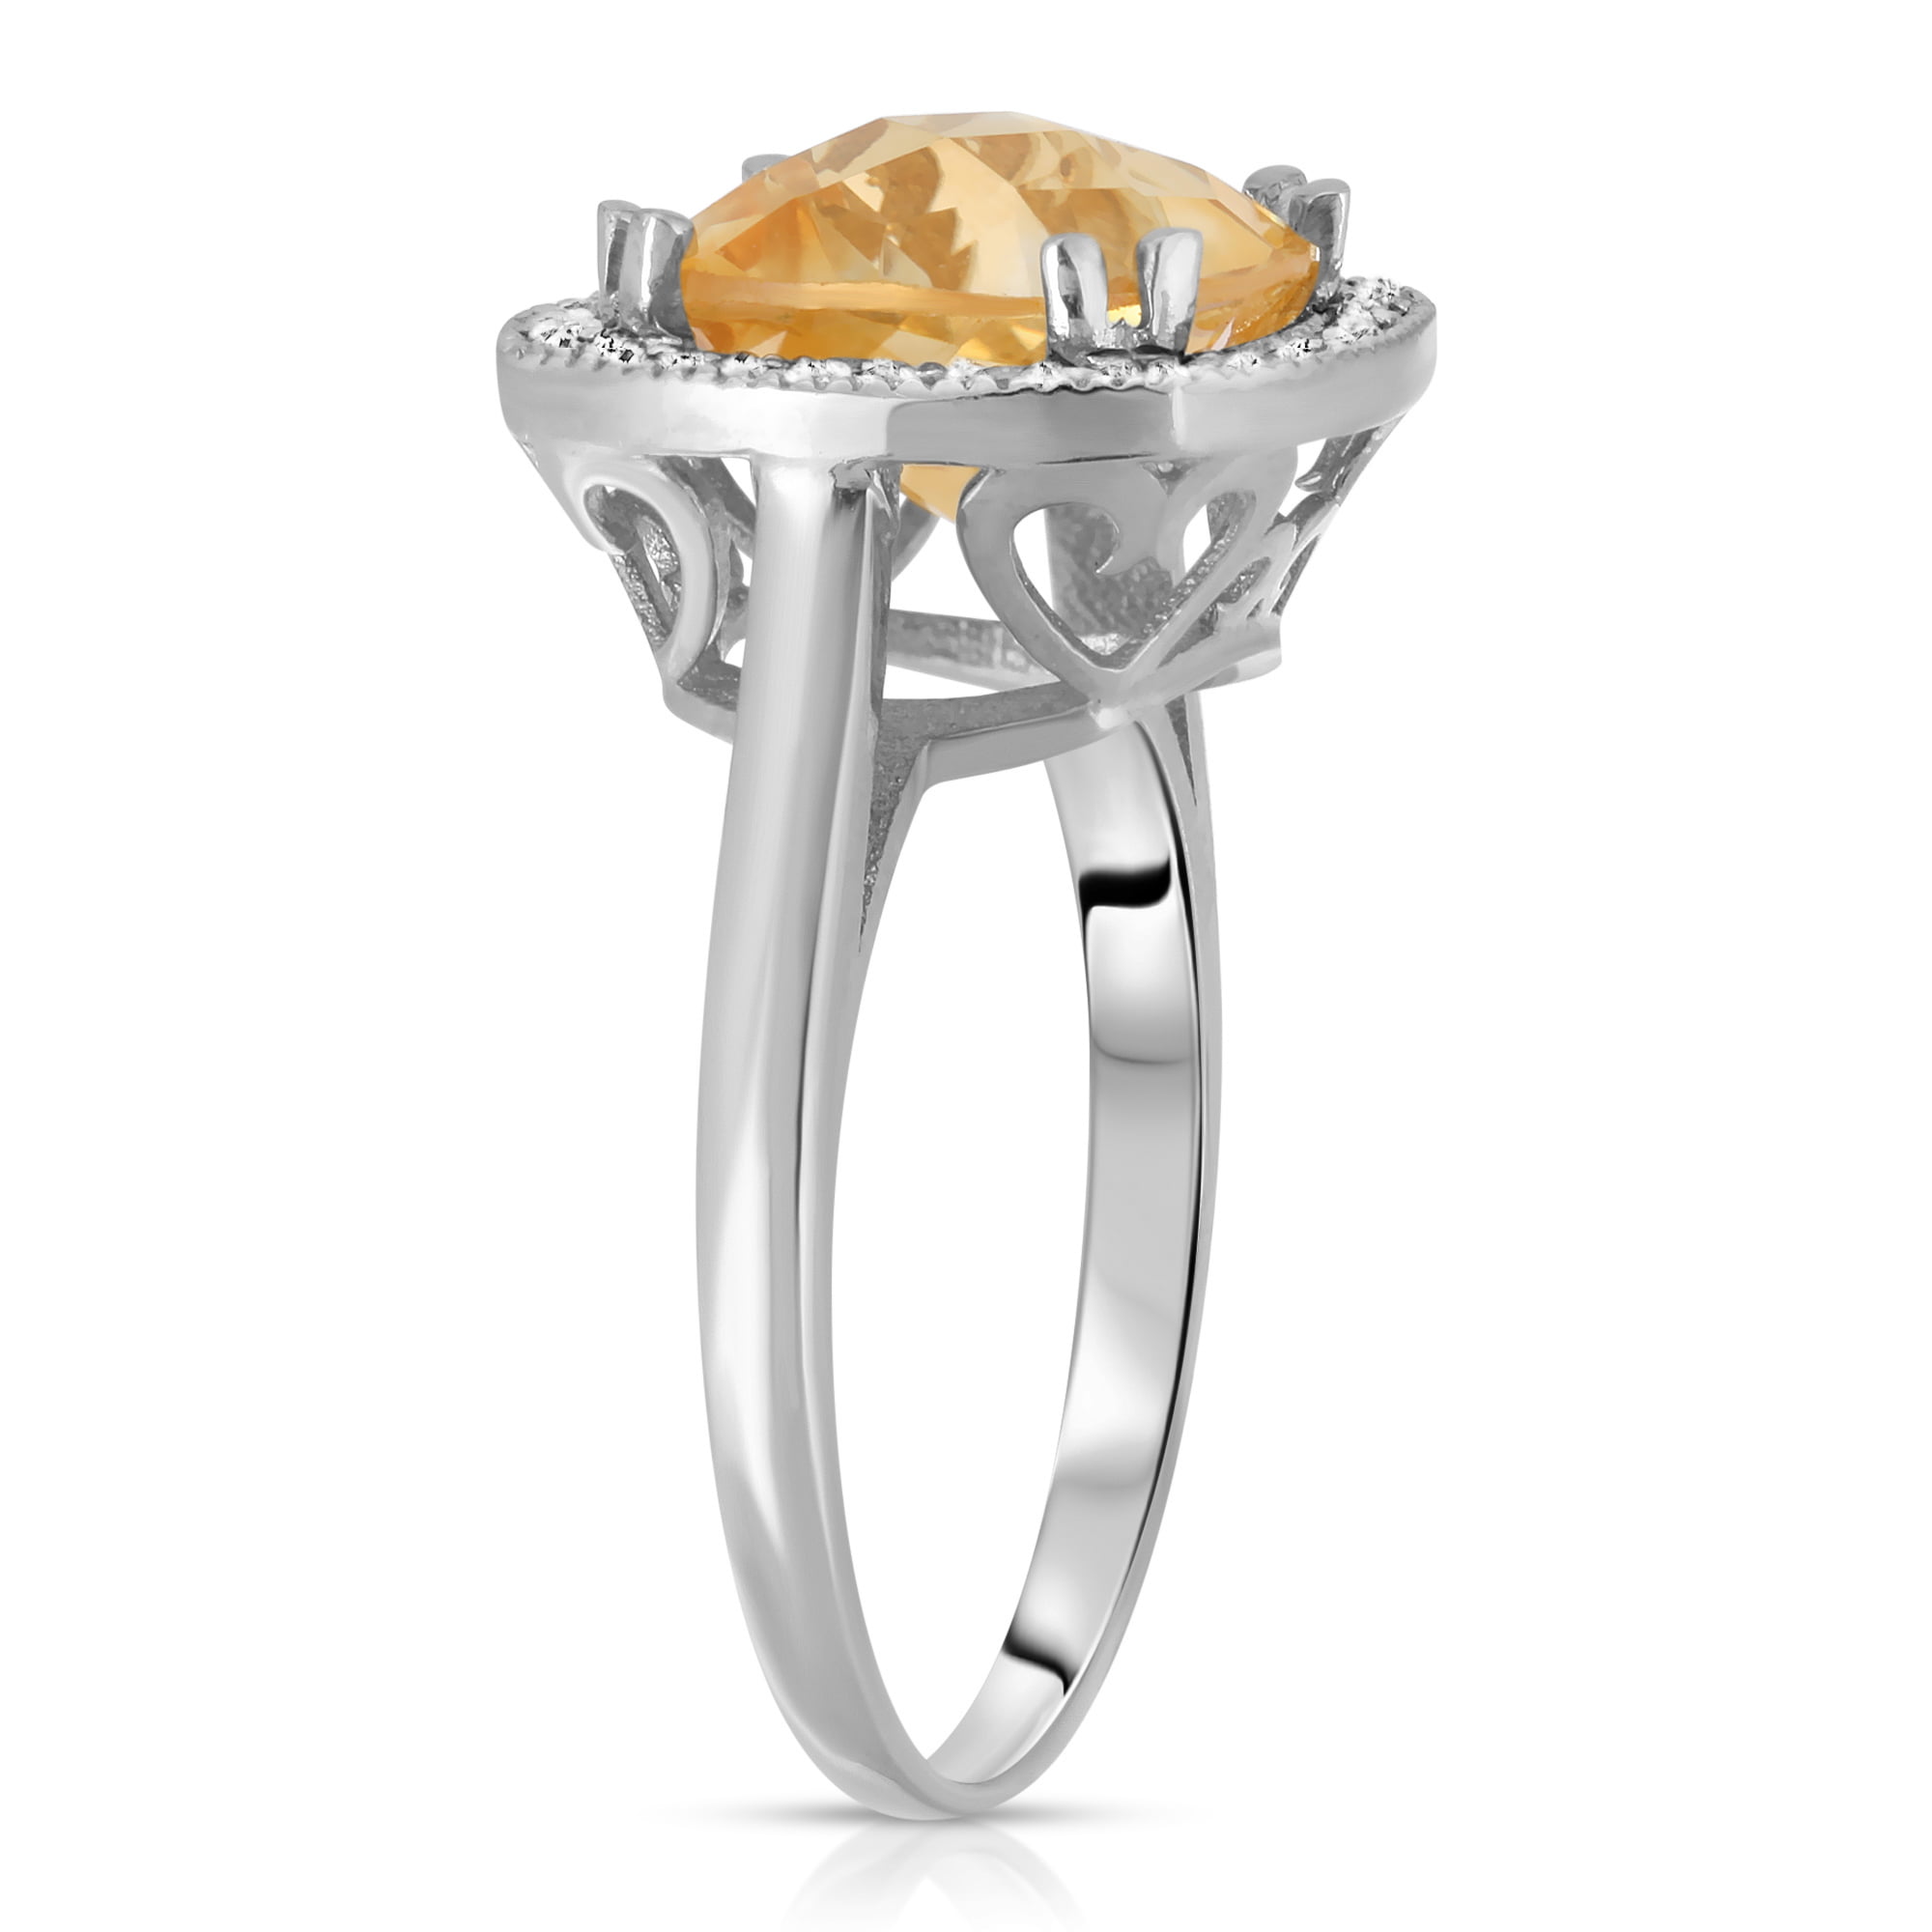 Galaxy Gold 14K Solid White Gold Cushion Cut 3.8 CTW Ring with Natural  Diamonds and Natural Citrine (10.5)